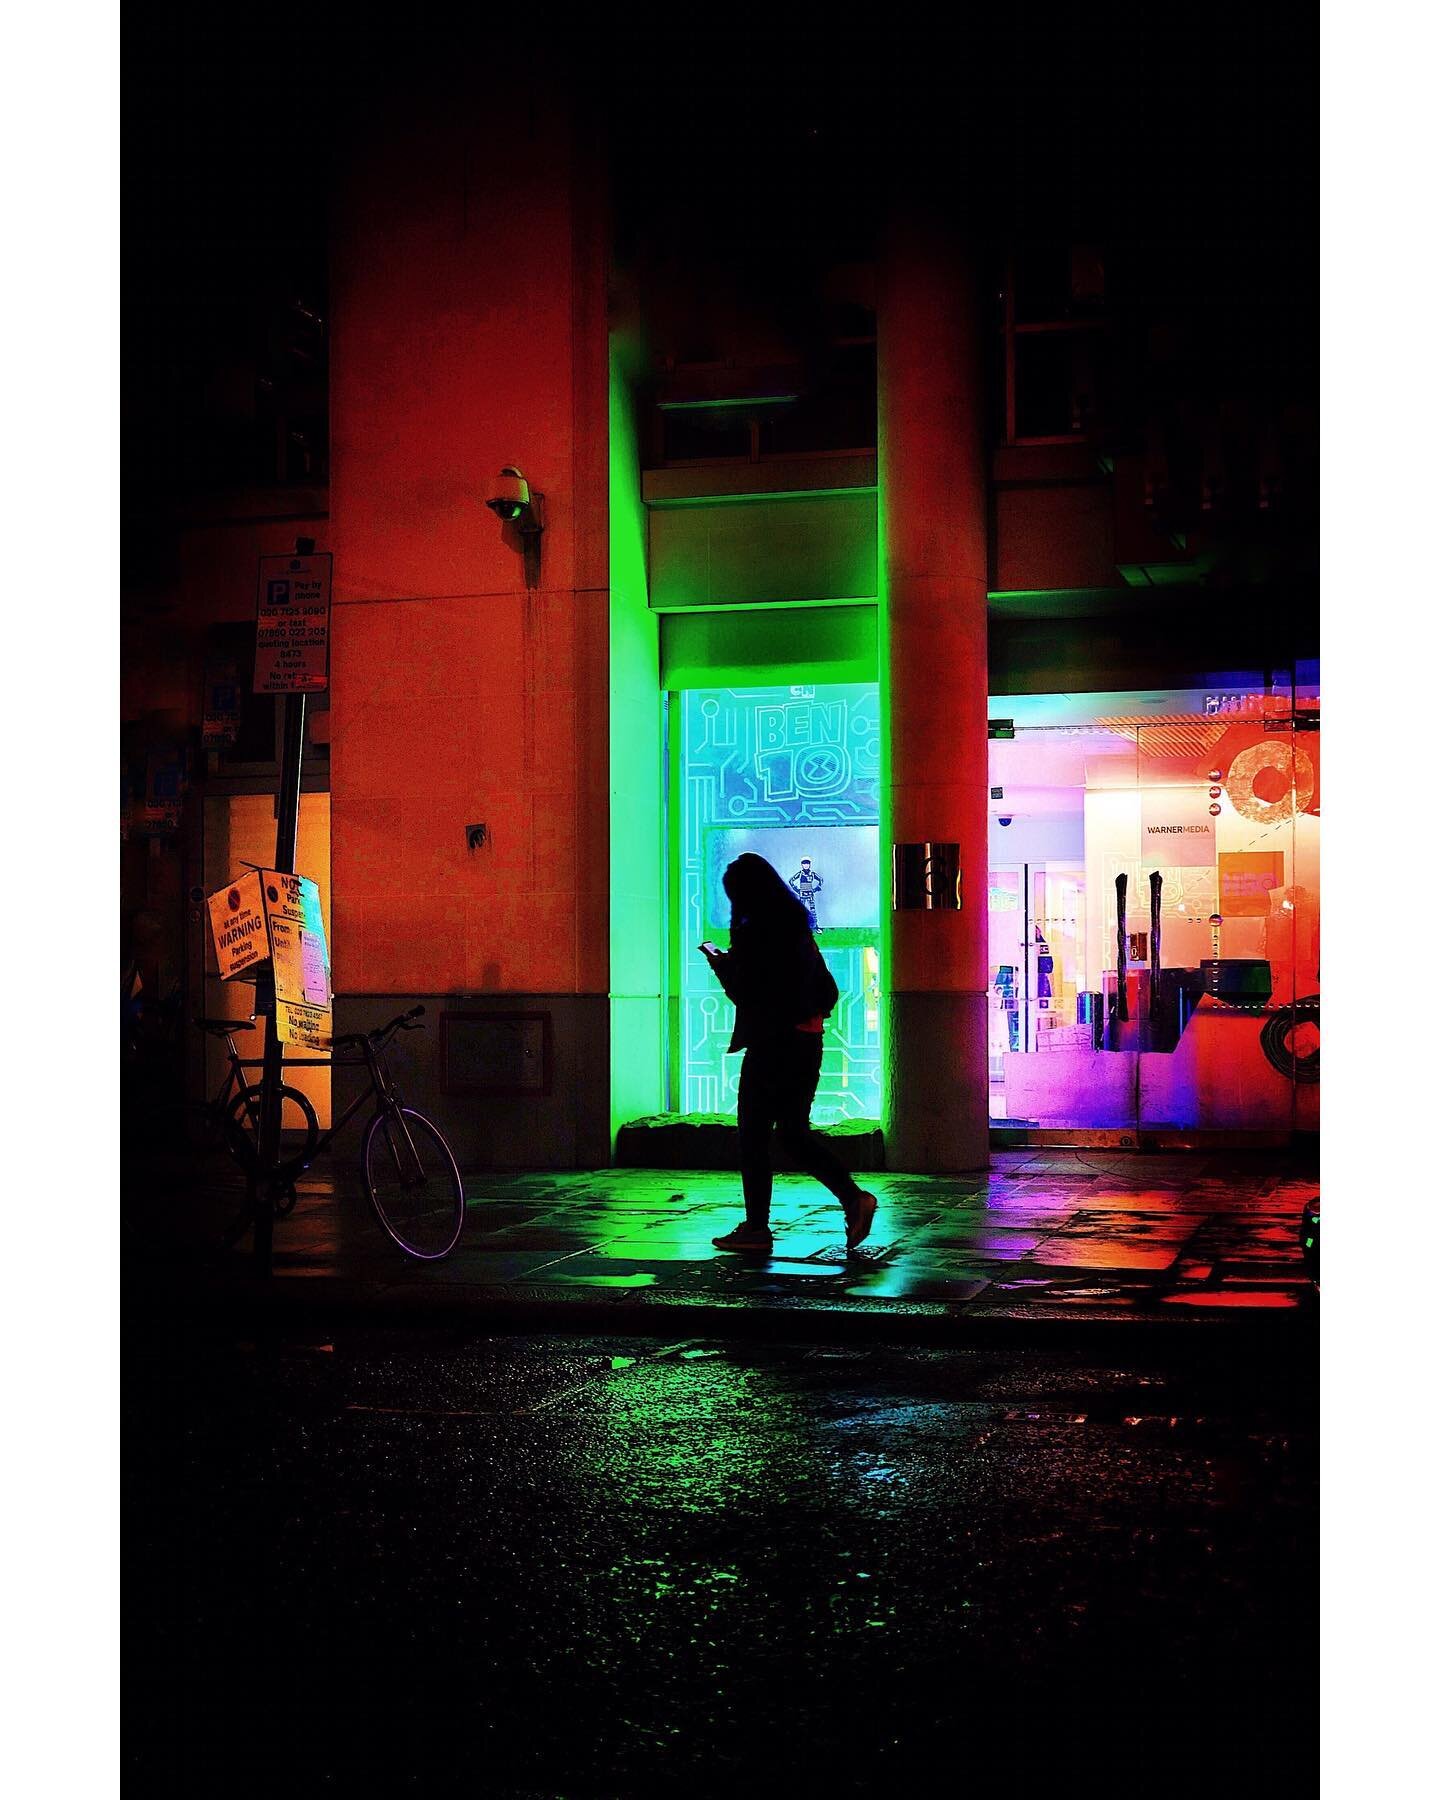 Regent Street, London, 2019
________________________________________________
My nocturnal visuals of London town. Please follow &amp; turn on notifications if you like my photography!! 
________________________________________________
.
.
.
.
#Thestr